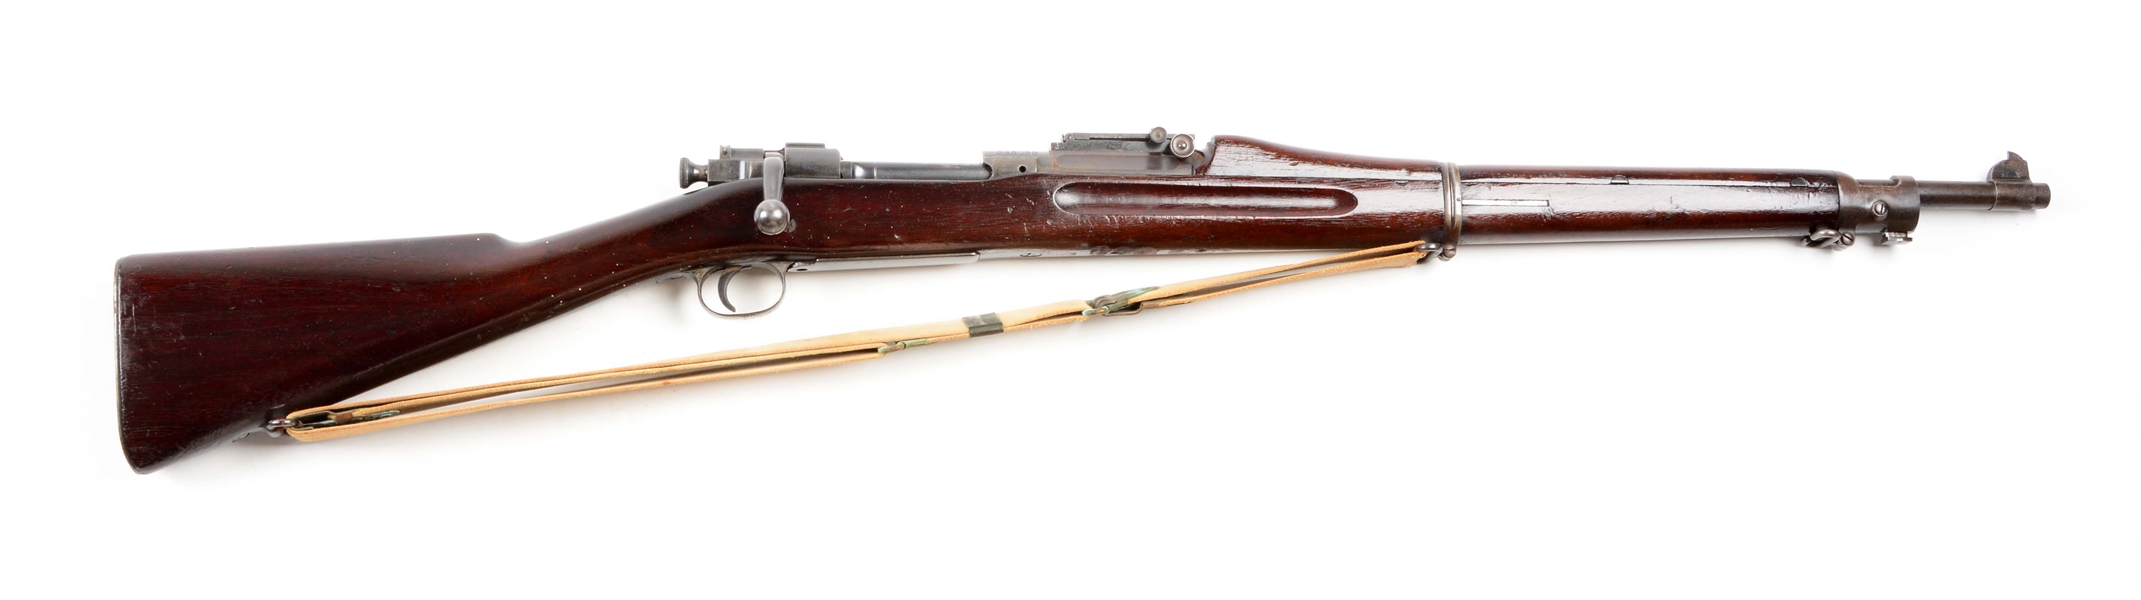 (C) SPRINGFILED MODEL 1903 NRA BOLT ACTION RIFLE (1913).